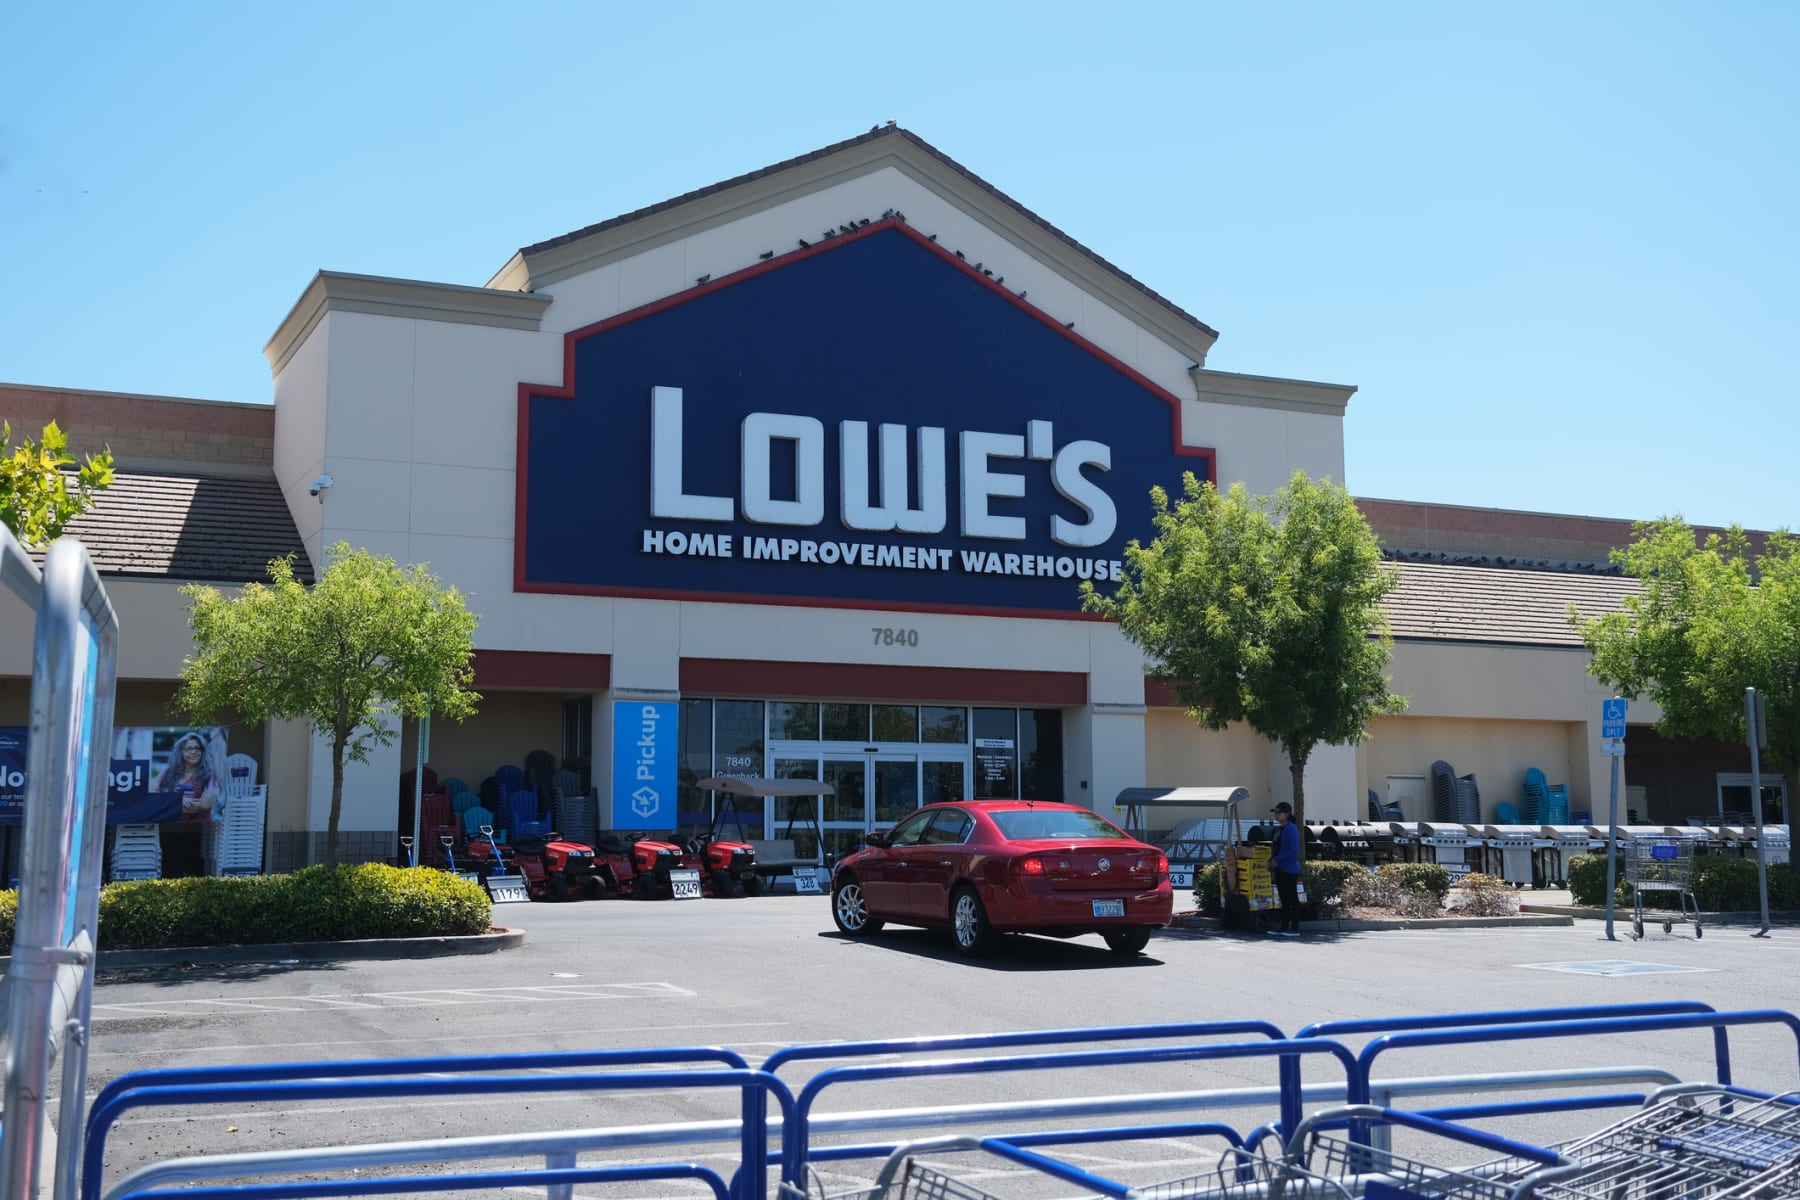 A Lowe's storefront.